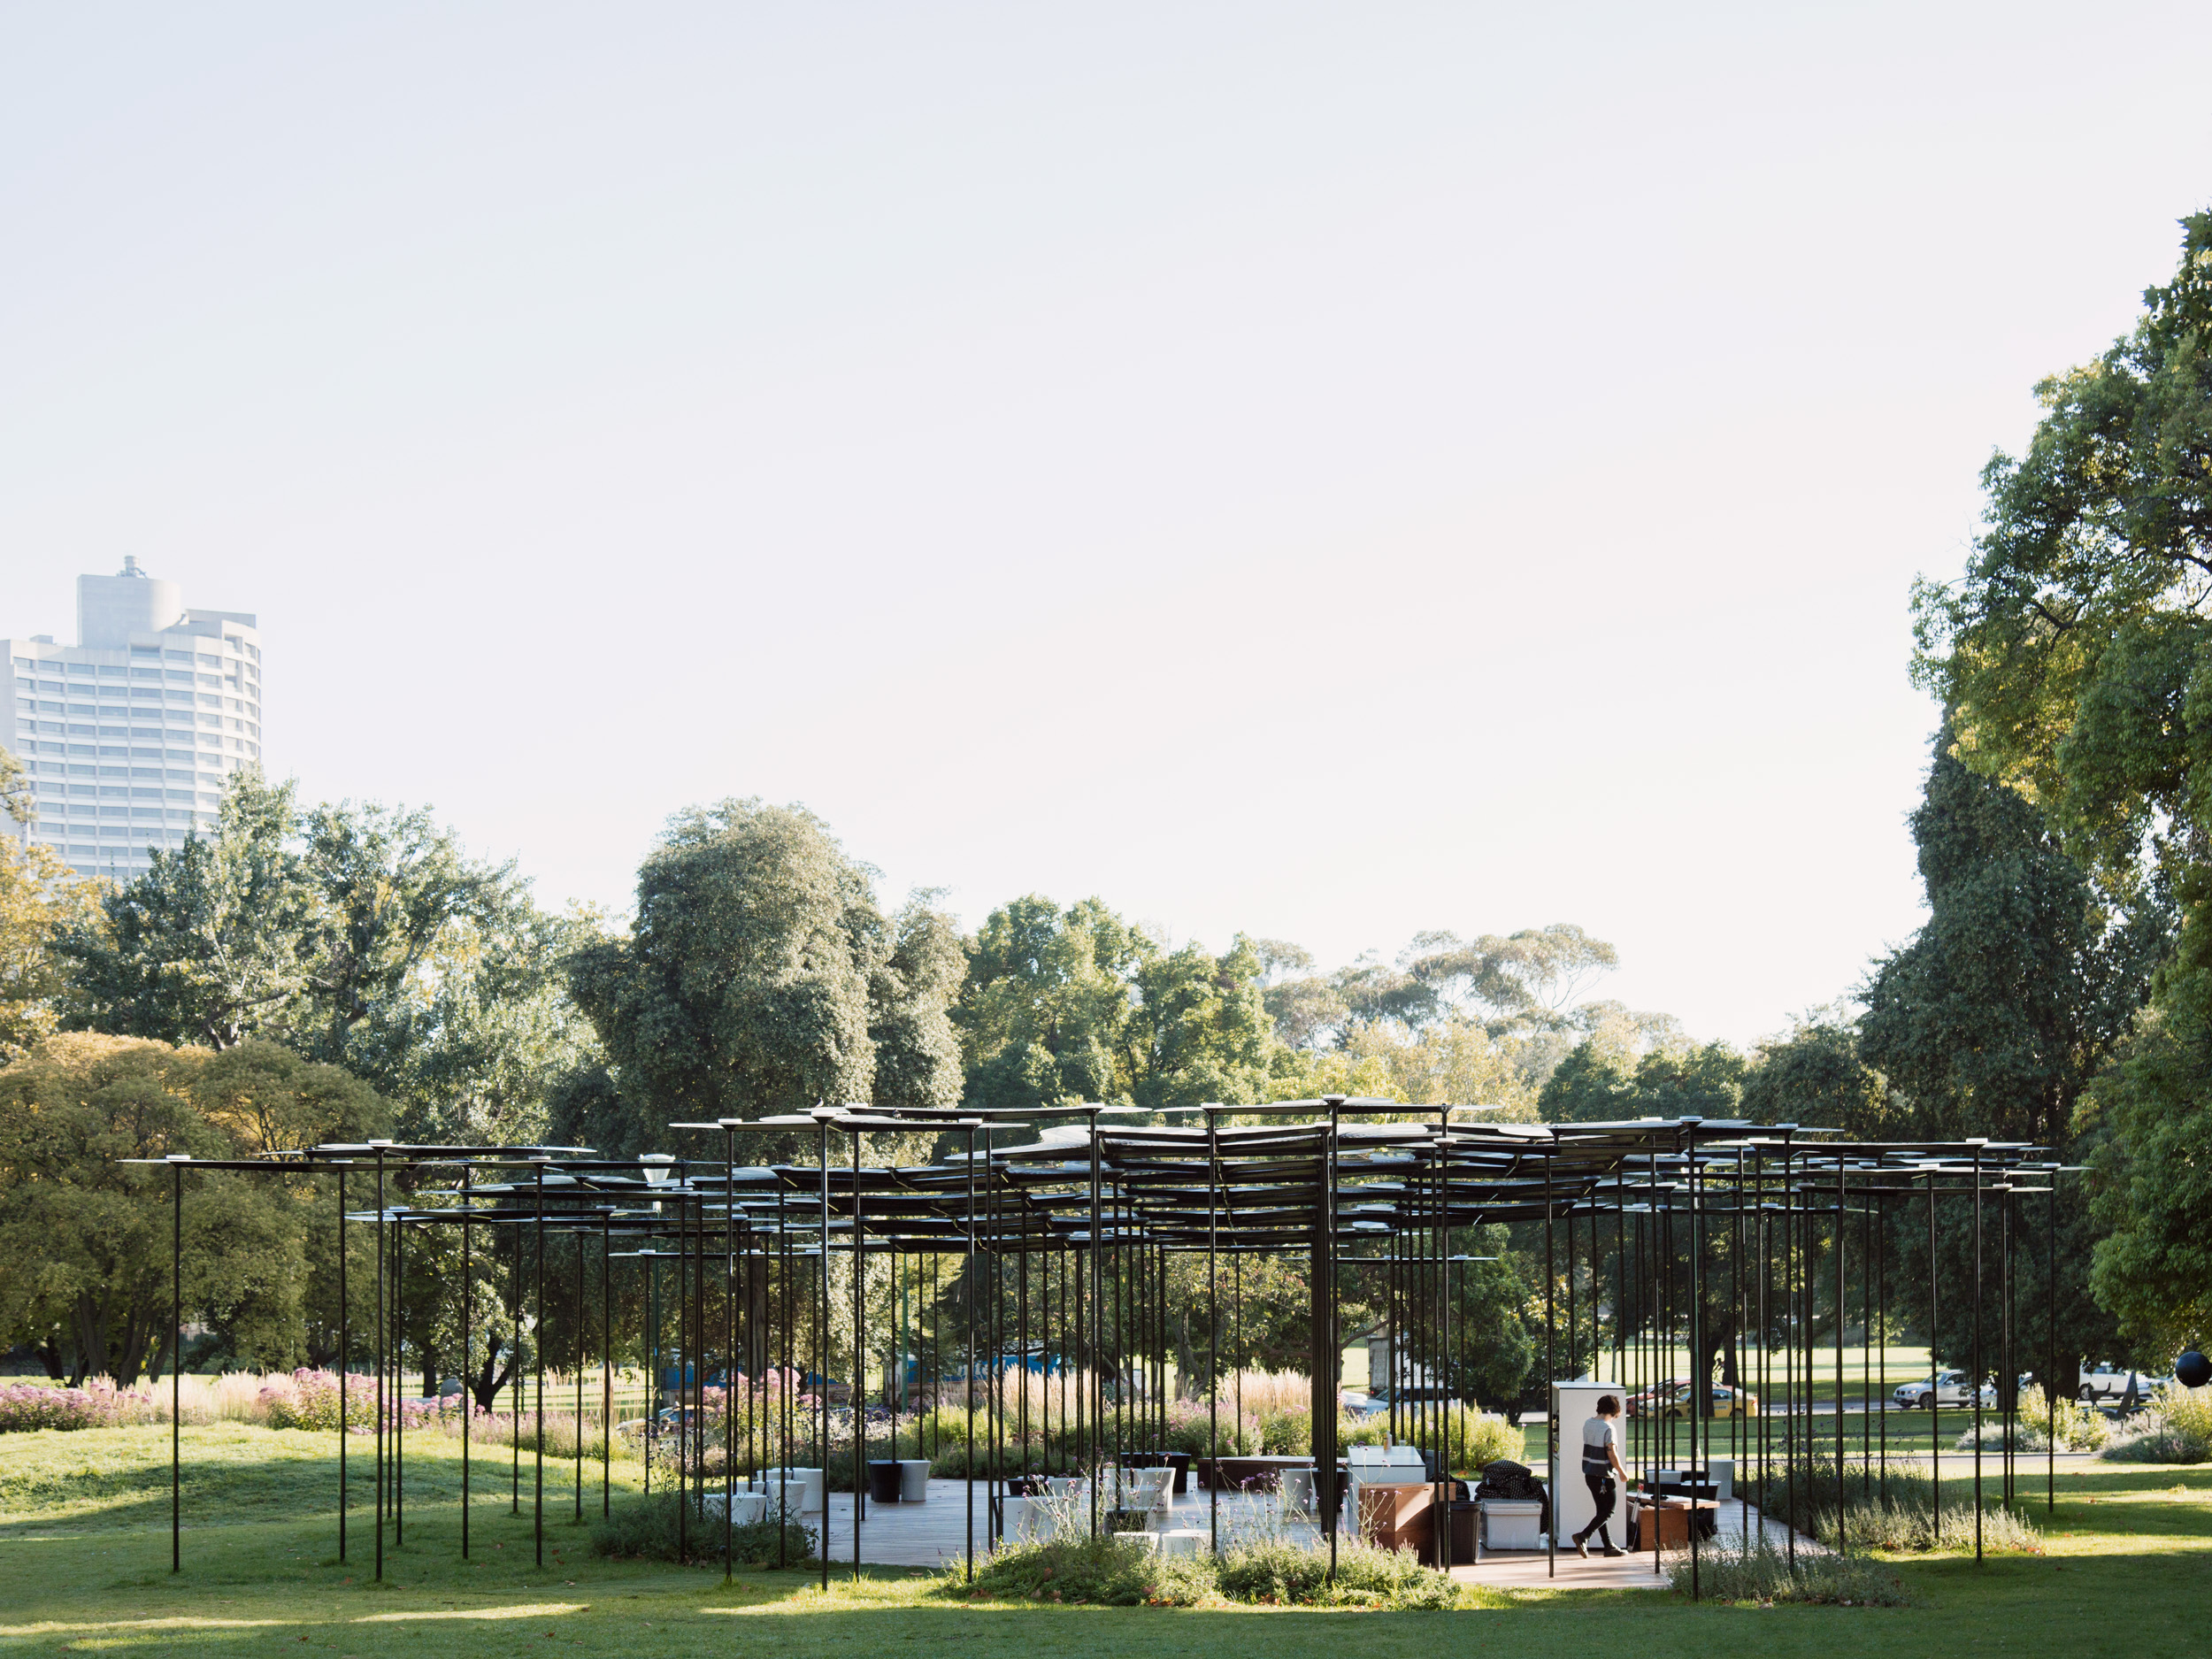 The second iteration of MPavilion in 2015 by AL_A. Photo by Rory Gardiner, courtesy of MPavilion.